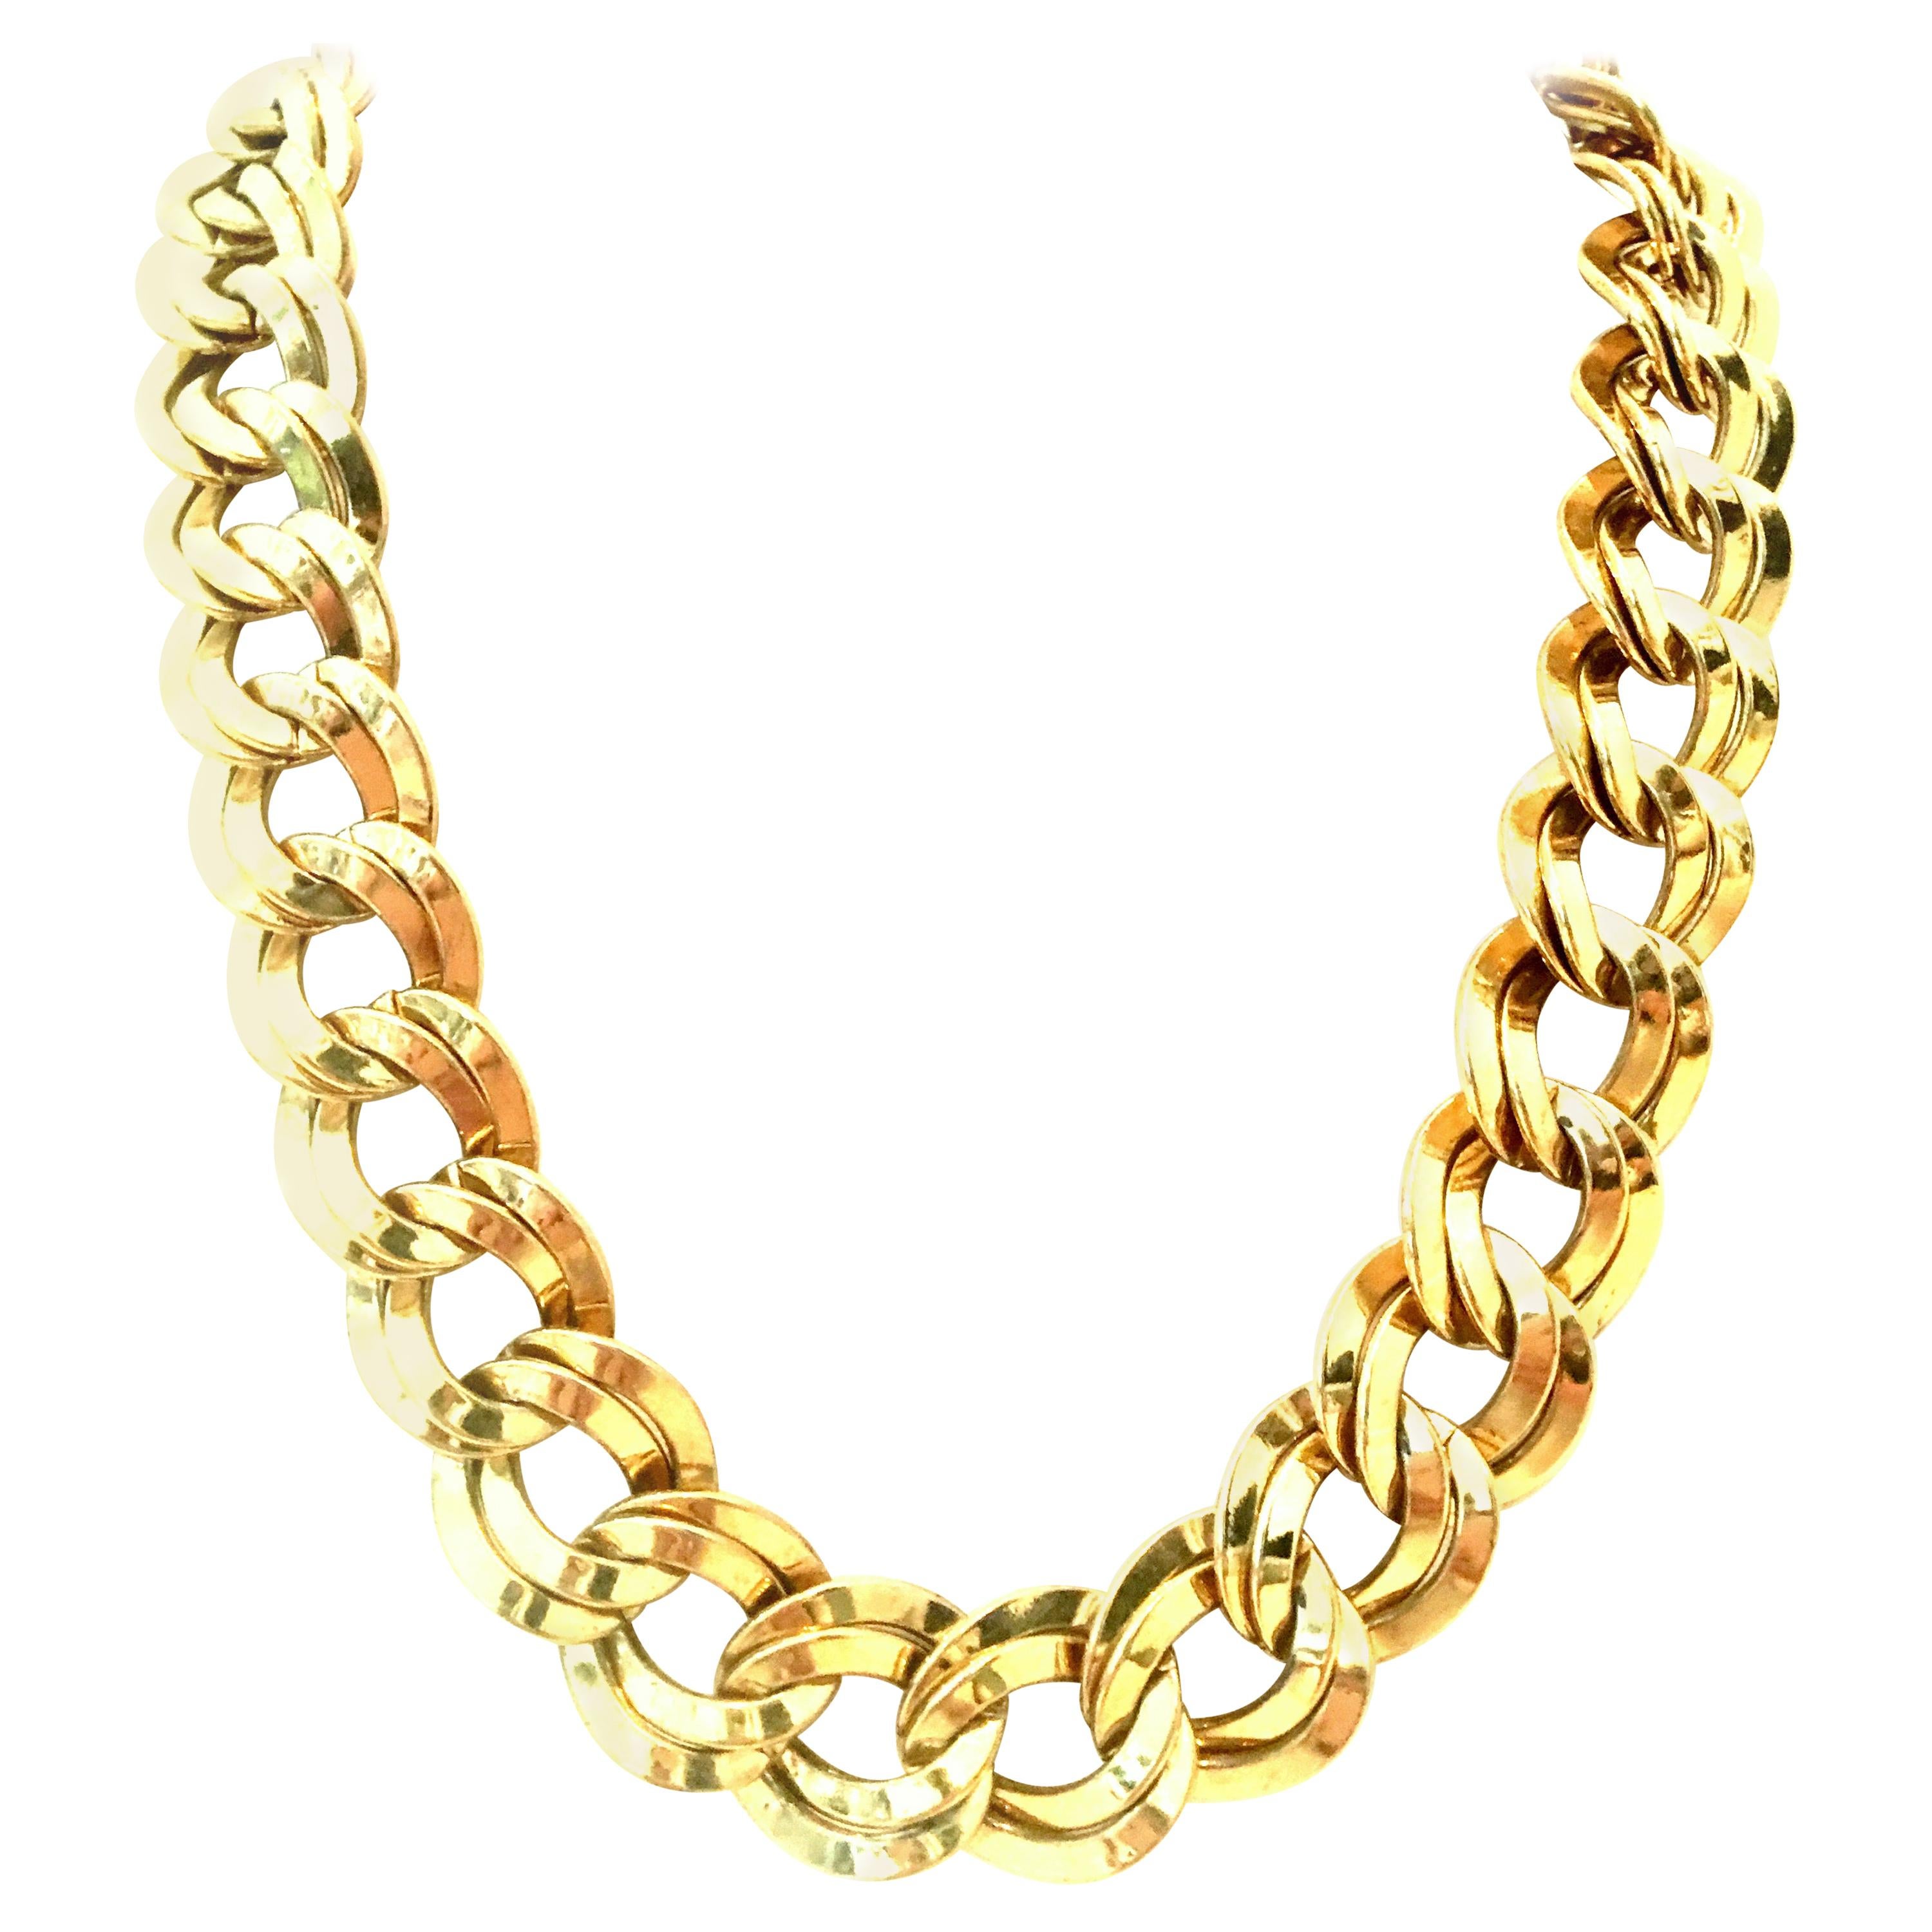 20th Century Gold Plate Double Chain Link Necklace  By Monet